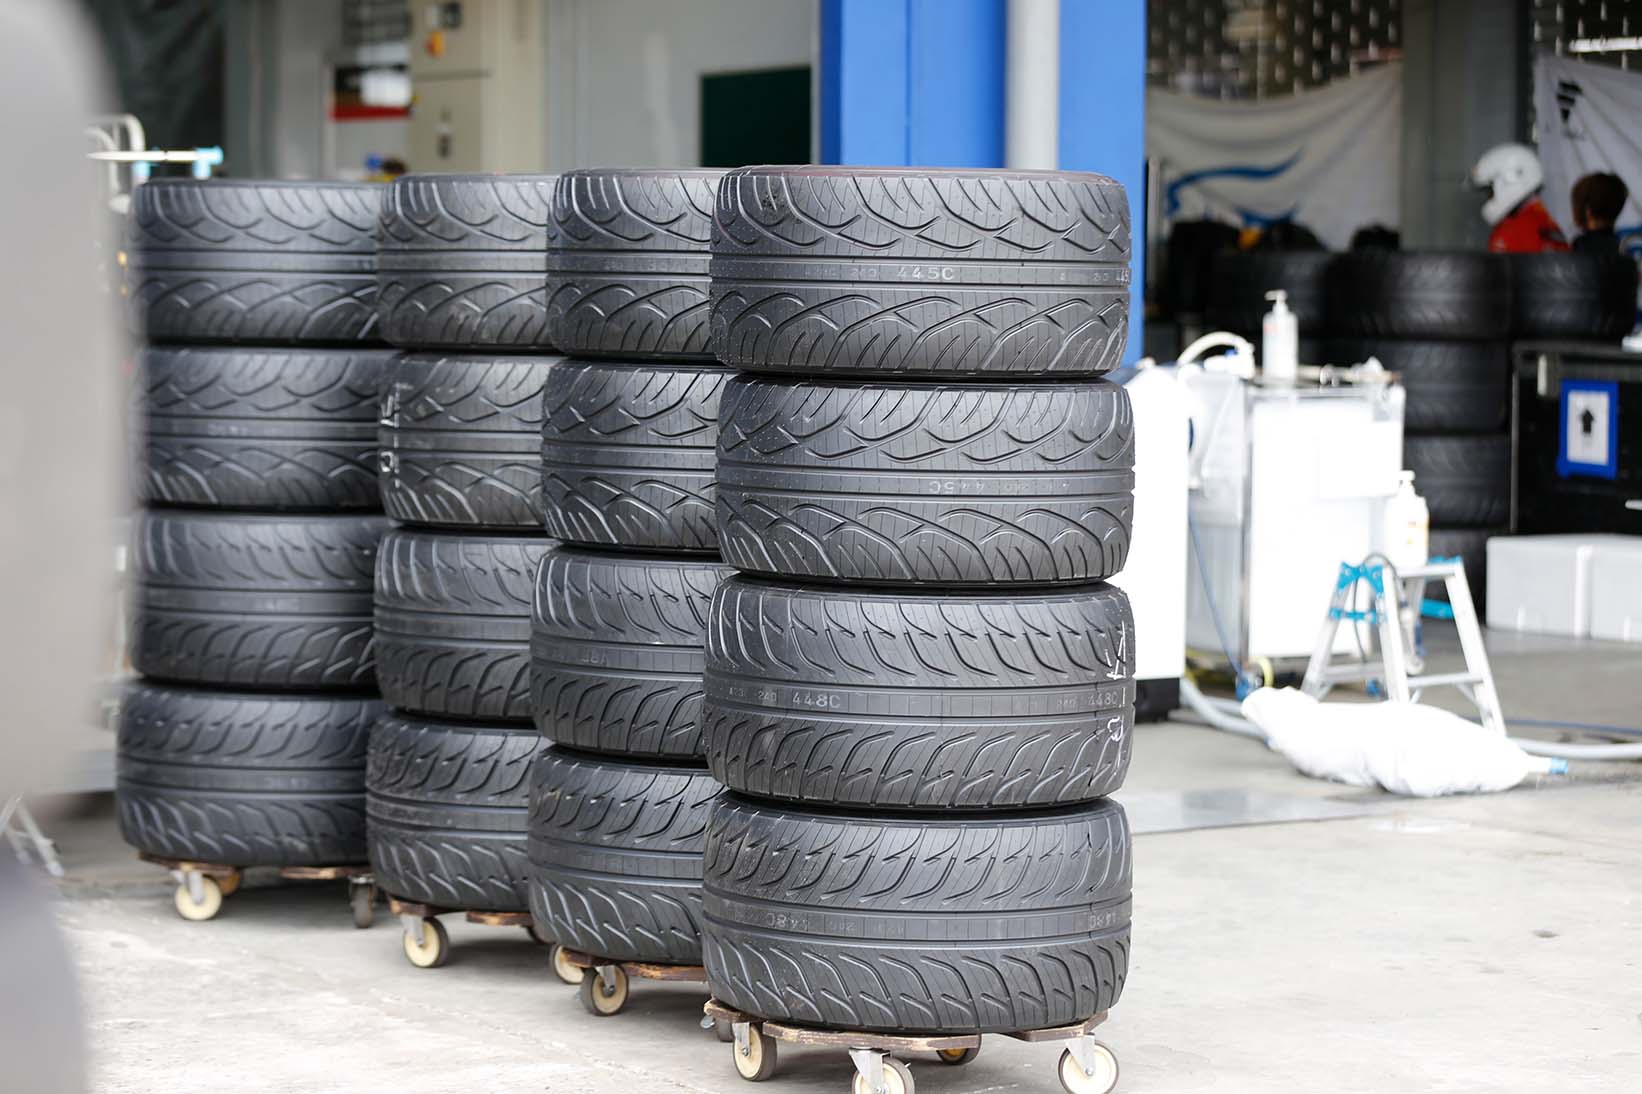 Stacked tires arranged in precise formation.